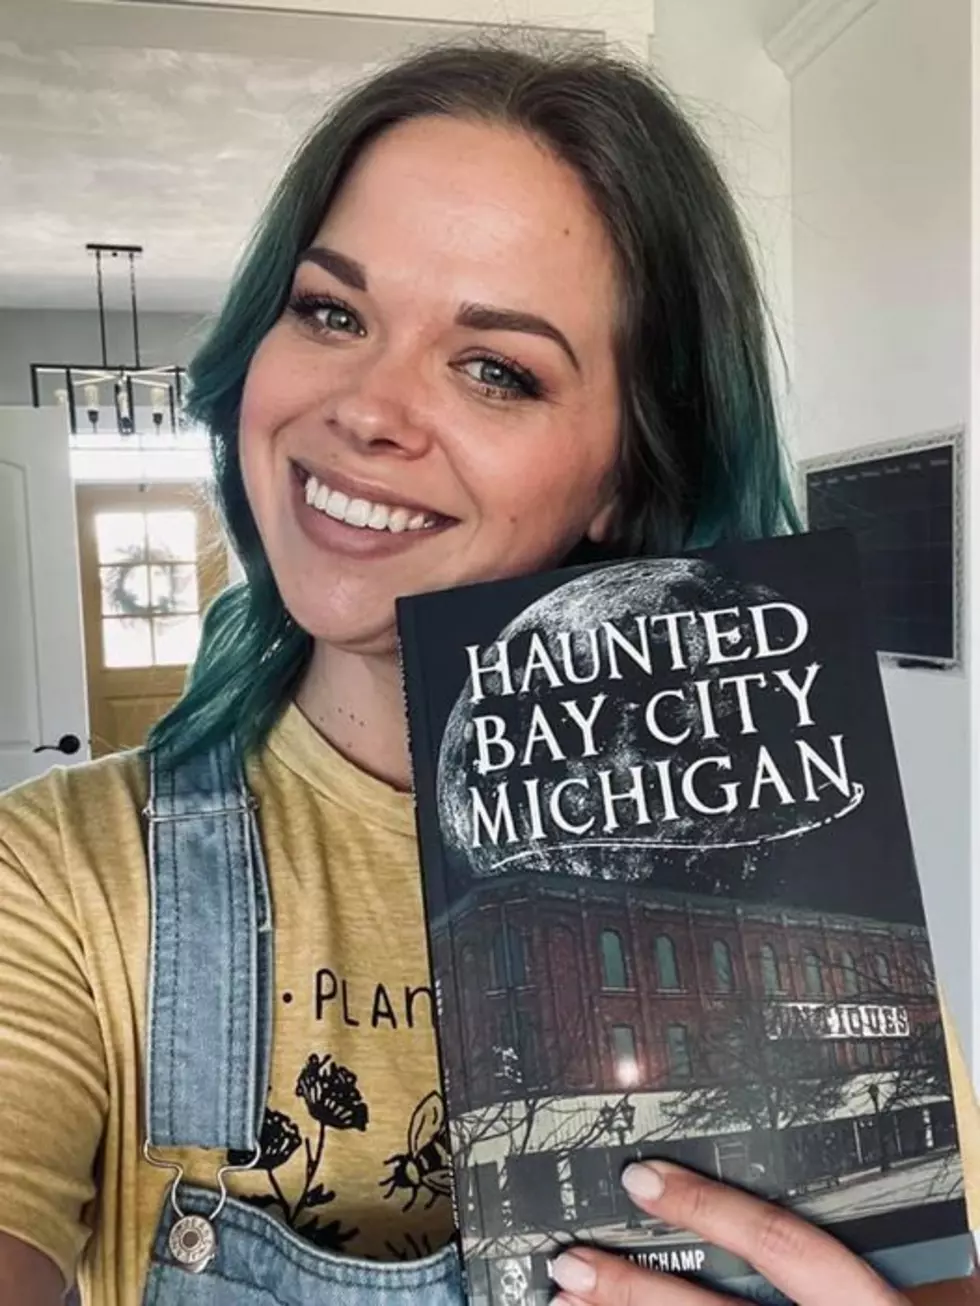 Richel From Ghost Hunters Gives Haunted Bay City, Michigan Book A Thumbs Up